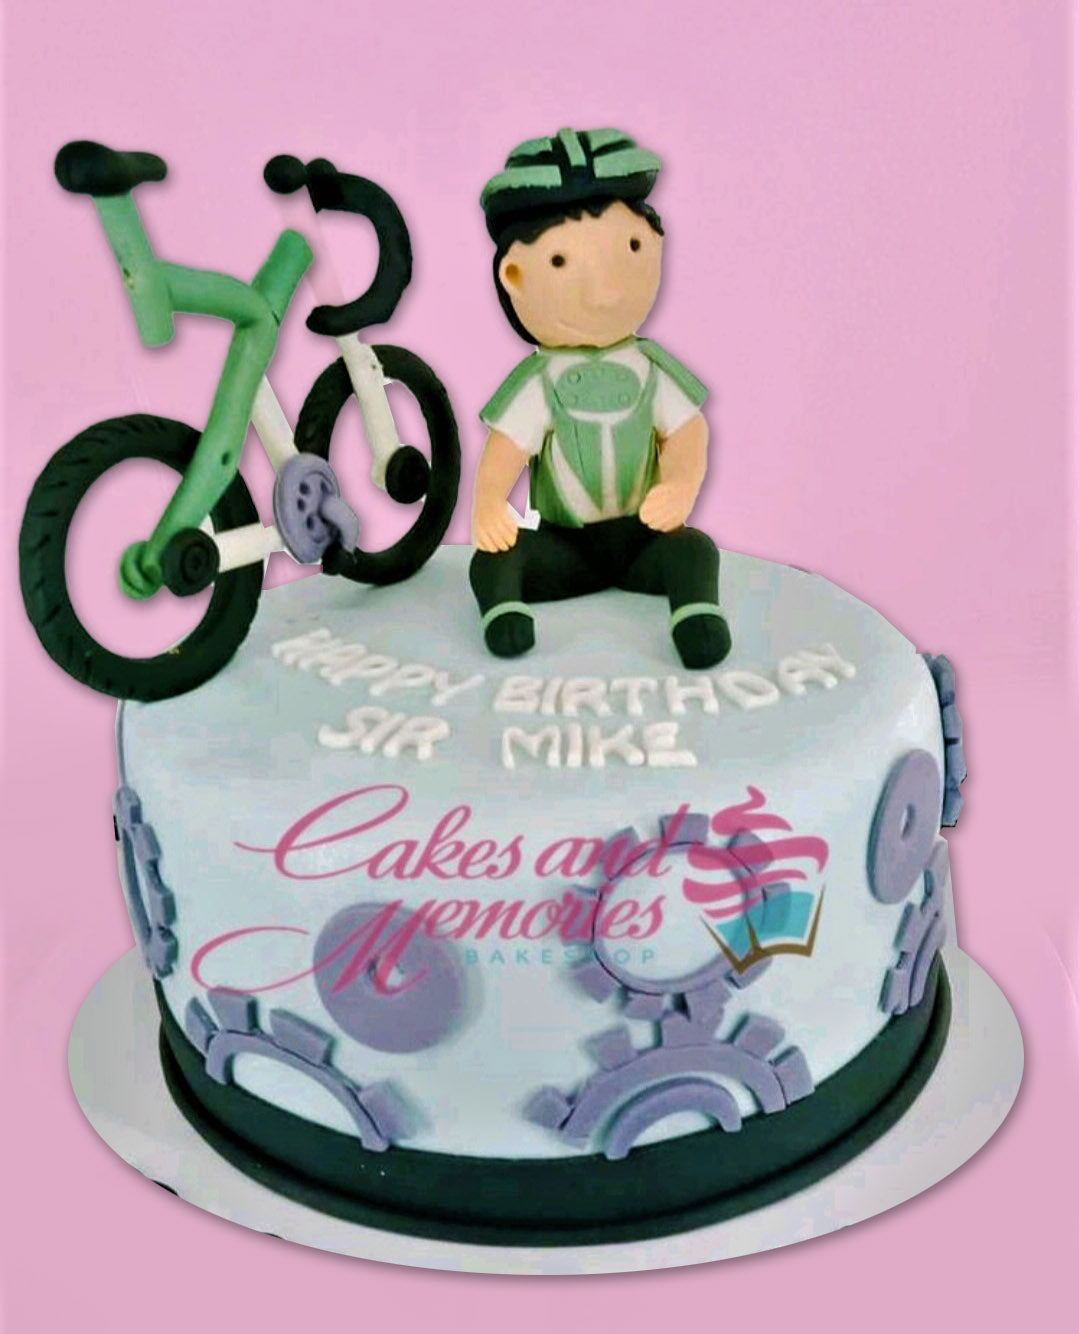 Bicycle Cake - 1113 – Cakes and Memories Bakeshop